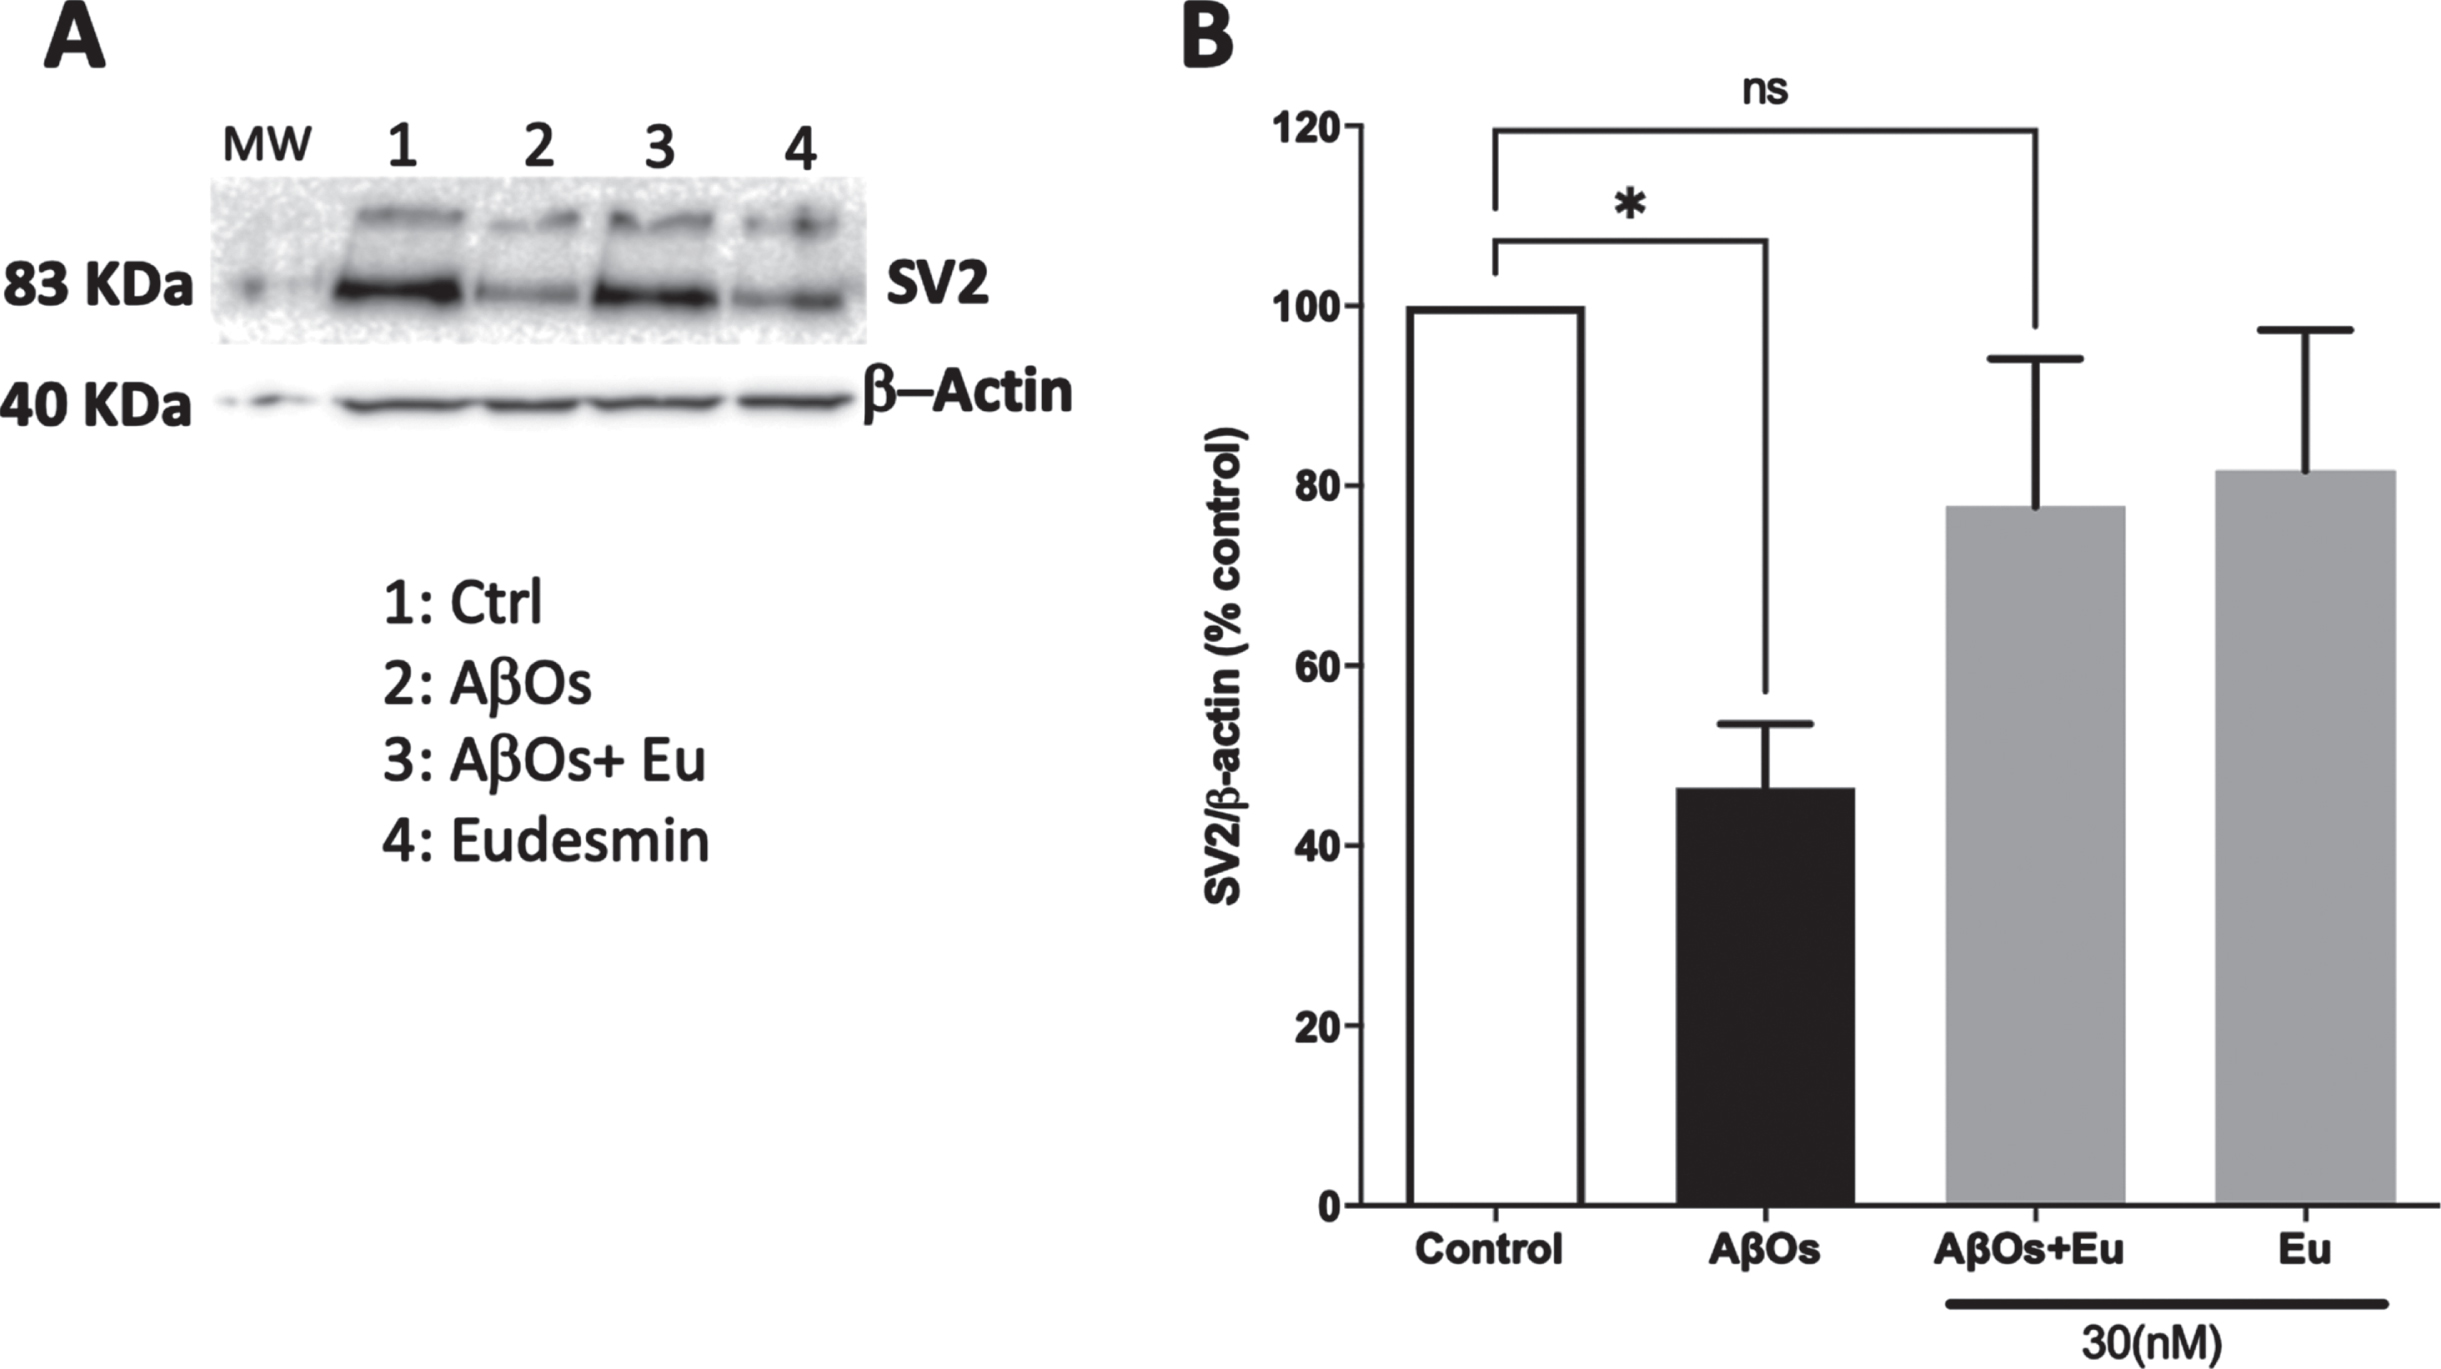 Neuroprotective effect of Eudesmin on synaptic markers: SV2 detection. Western blot images of neuronal cultures co-incubated for 24 h with AβOs (0.5μM) and Eudesmin (Eu 30 nM) SV2 total expression (A). Total expression intensity was measured using the Odyssey FC detection system. β-actin detection was used as reference. Values are expressed as the percentage of the control group (without AβOs treatment) (B). Values are mean±SEM, n = 3 using one-way ANOVA and Bonferroni test. *p < 0.05 versus control group.